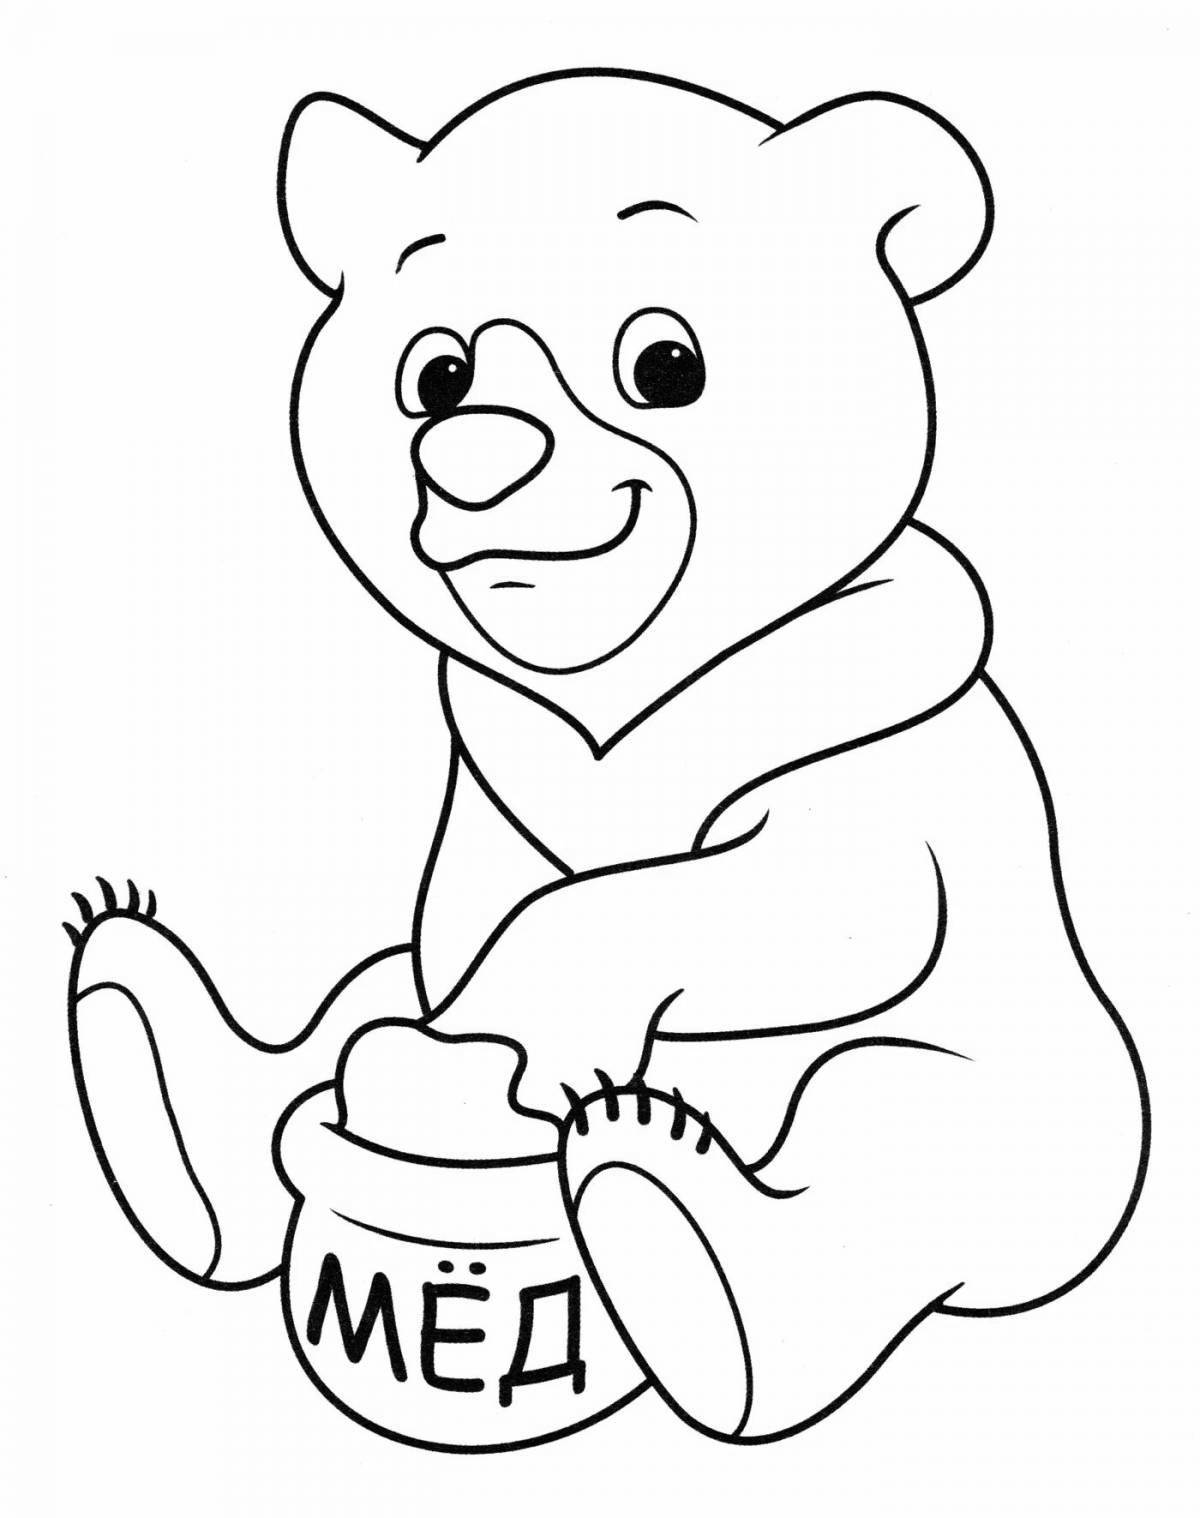 Laughing teddy bear coloring book for kids